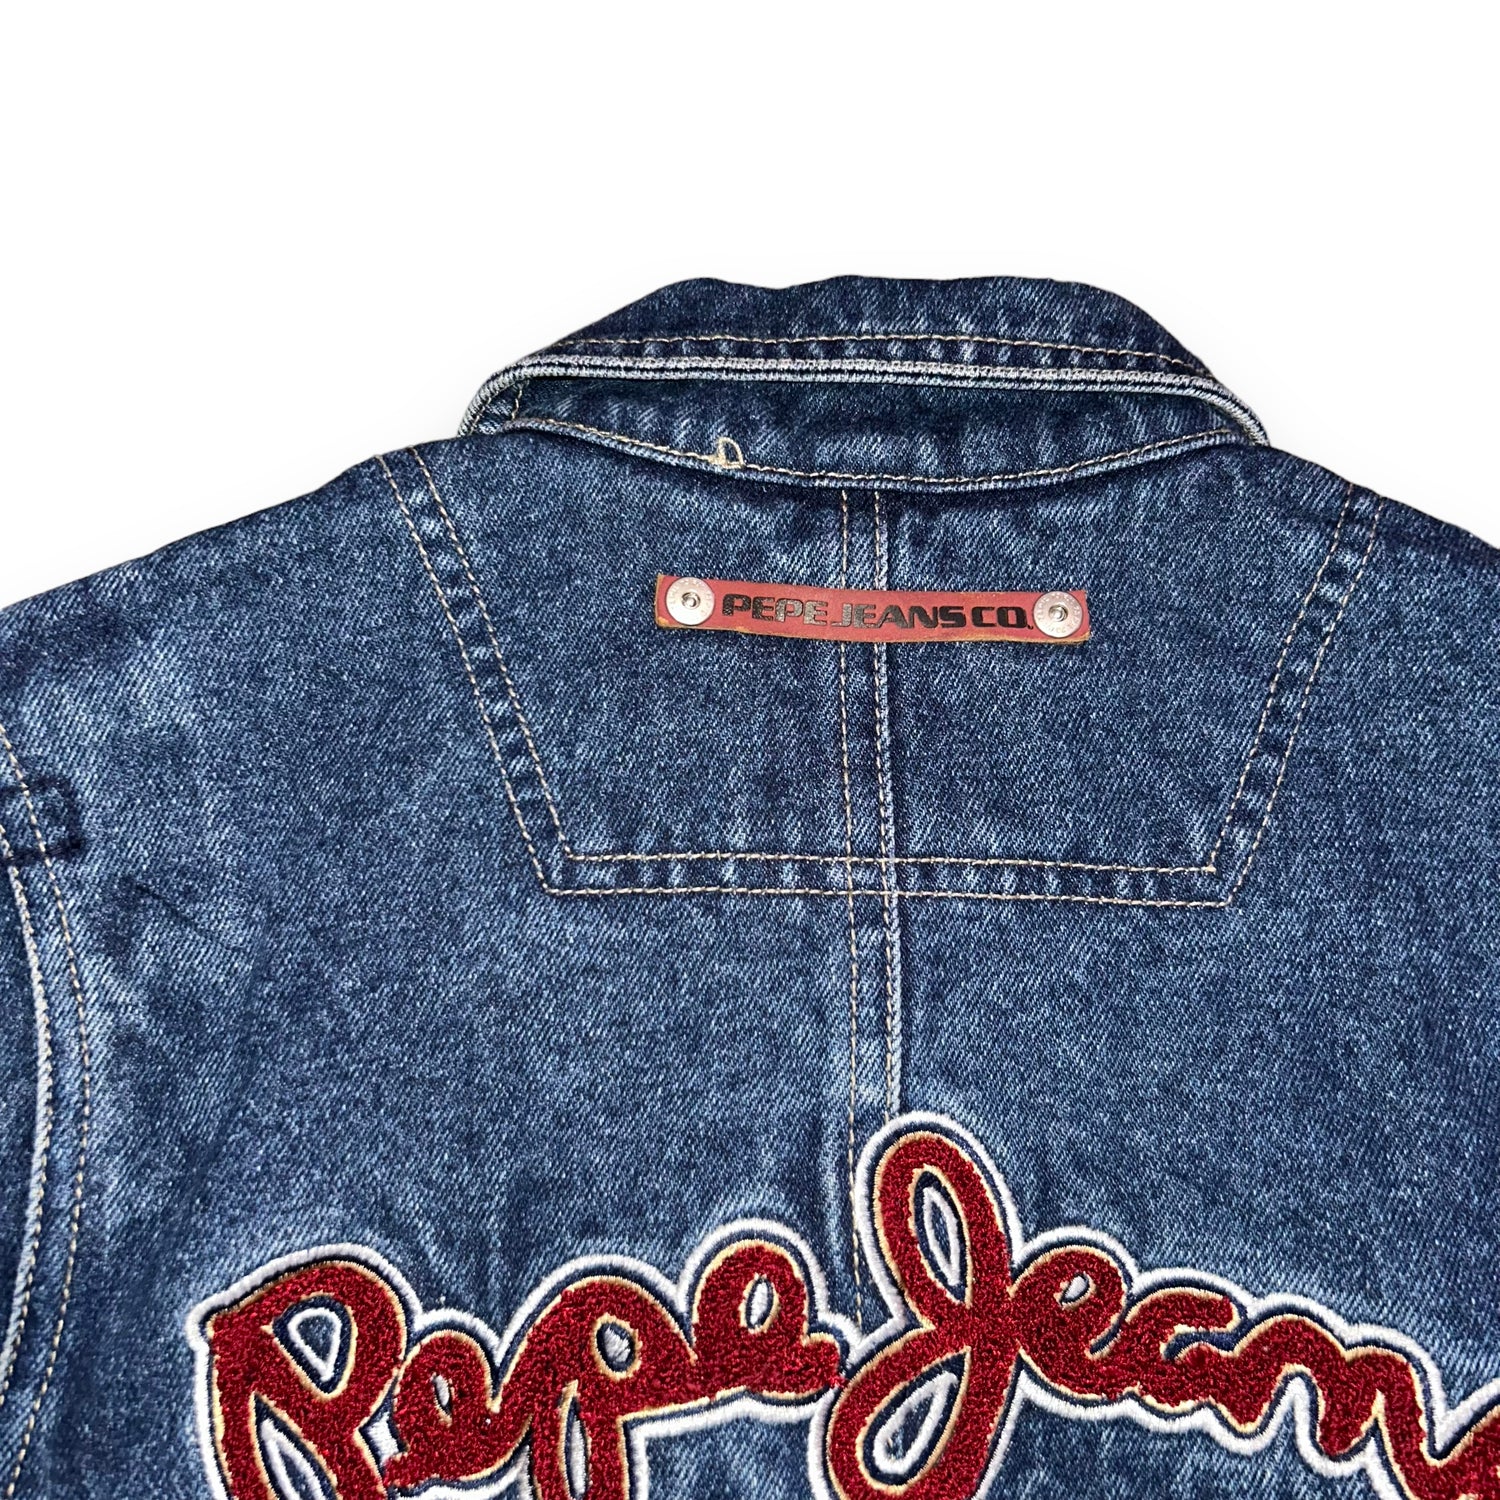 Giacca di jeans Pepe Jeans (S)